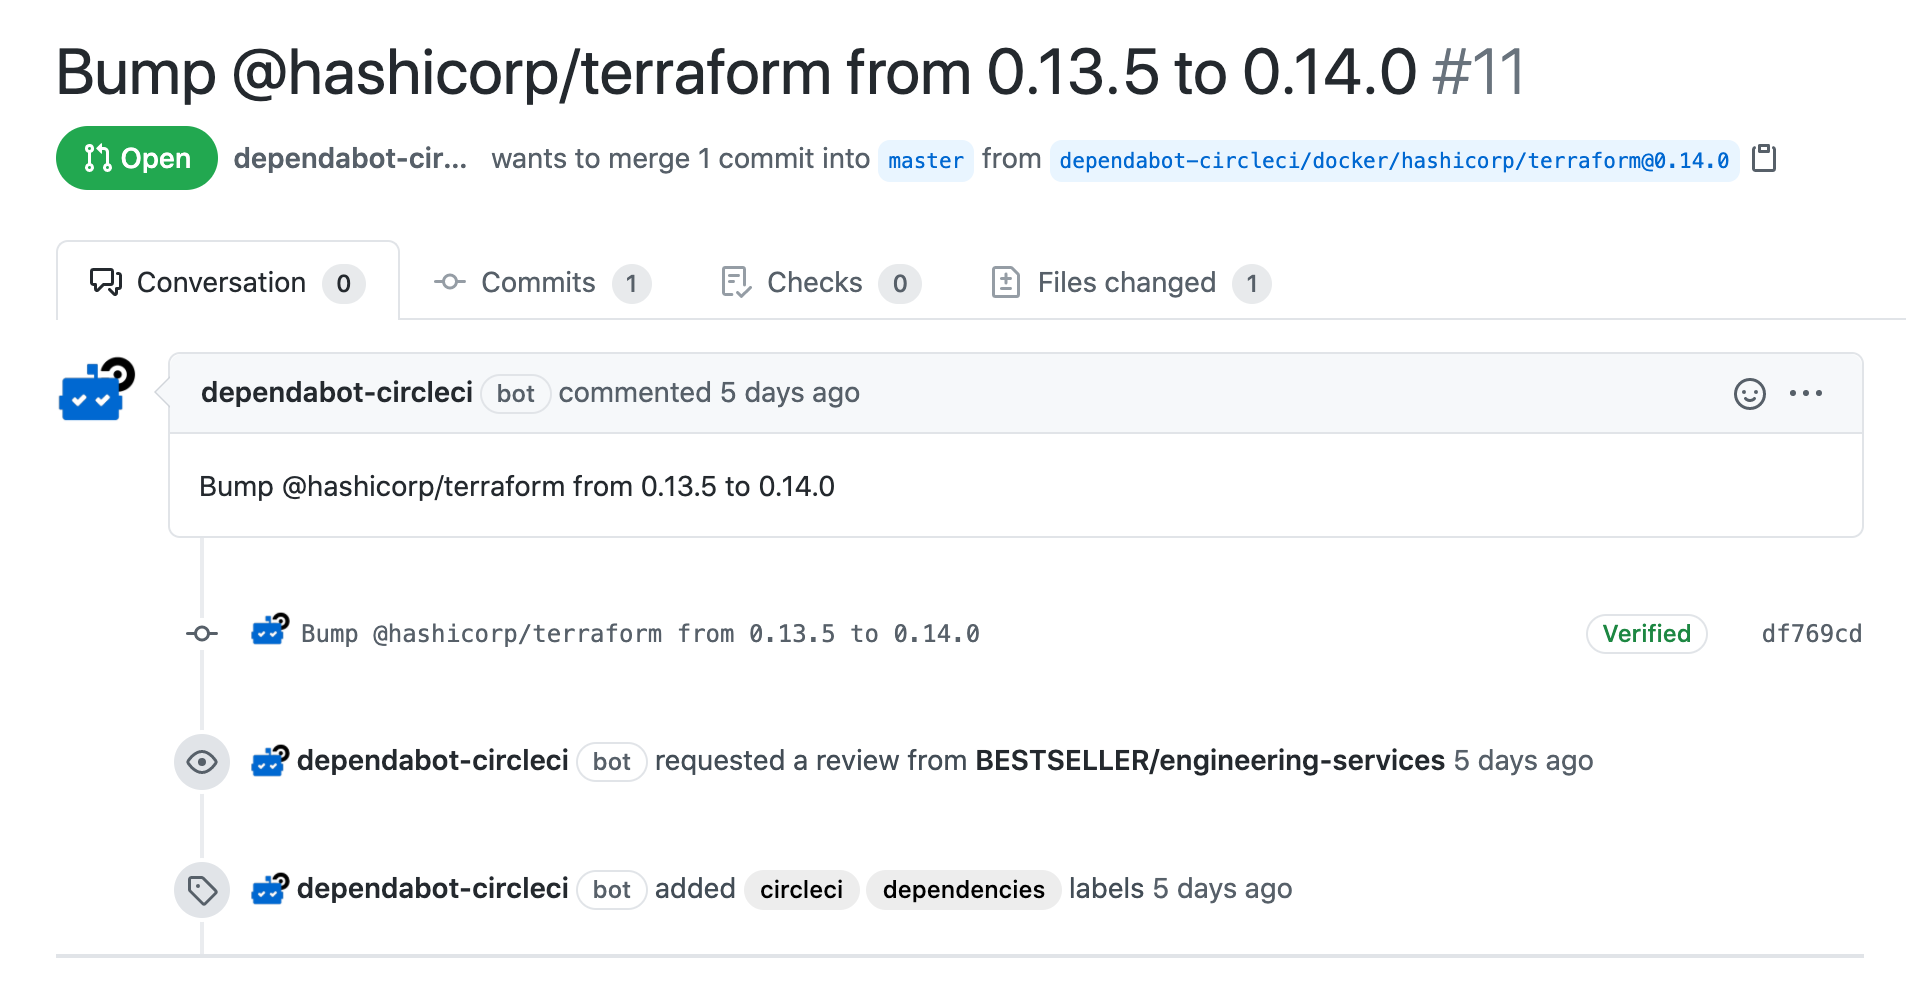 pull request created by dependabot-circleci